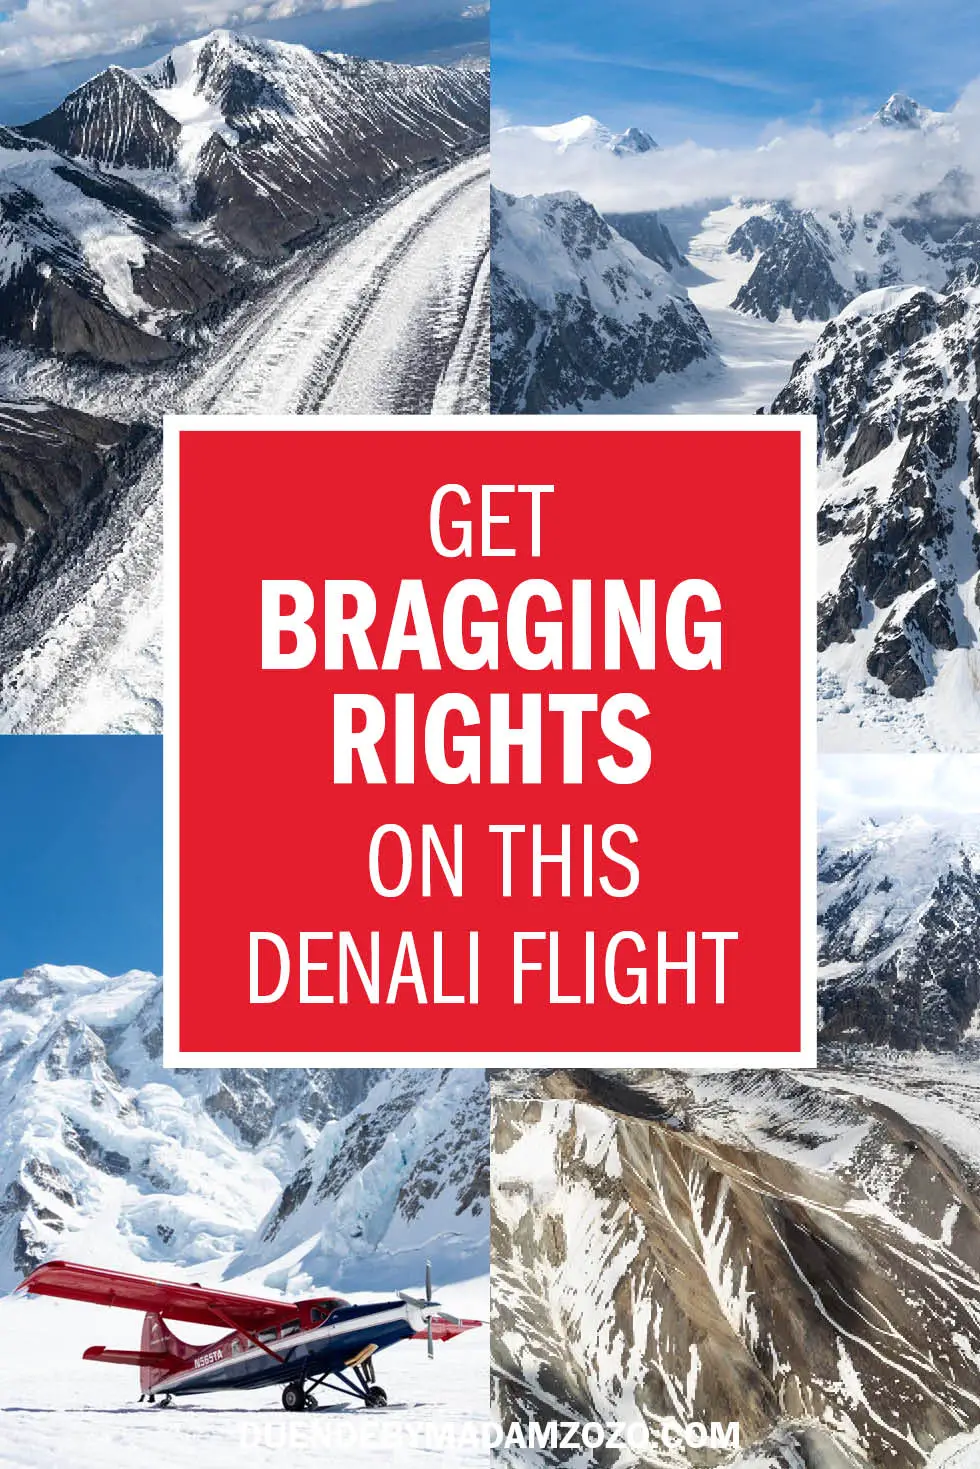 Images taken from a small plane over Denali National Park with the title "Get Bragging Rights on This Denali Flight"